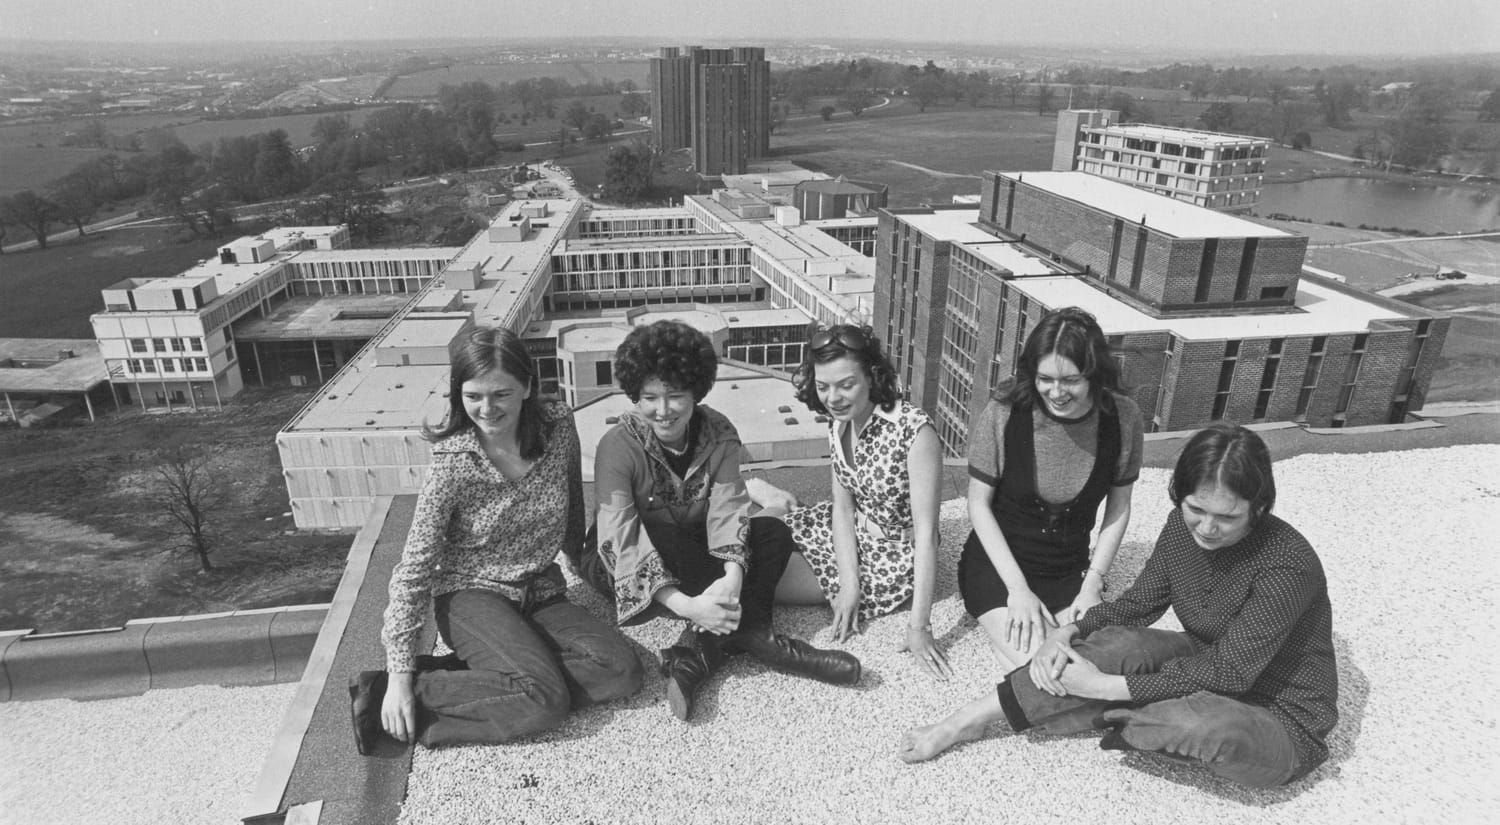 Students on top of one of the Towers in 1970